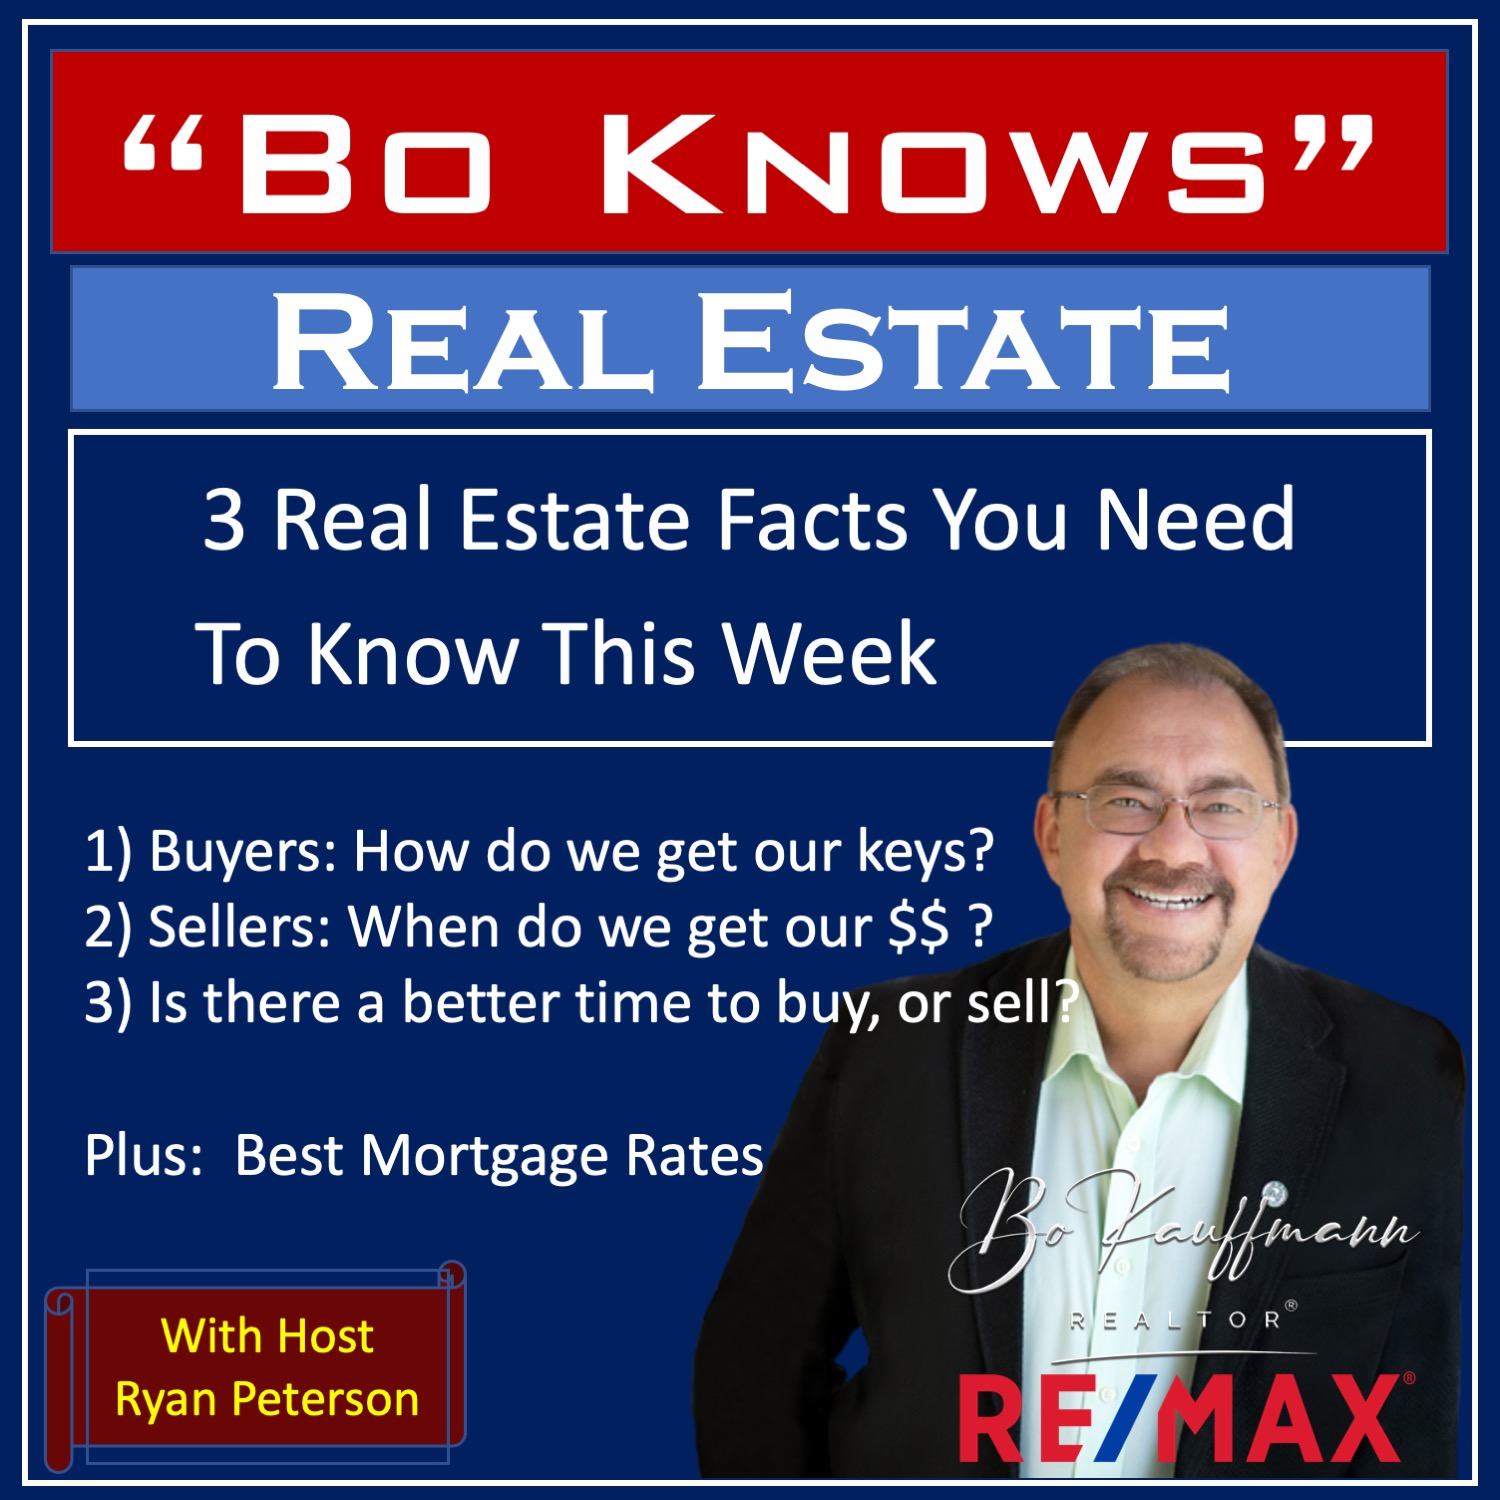 3 Real Estate Facts You Need To Know - Mid-Aug 2022 Image